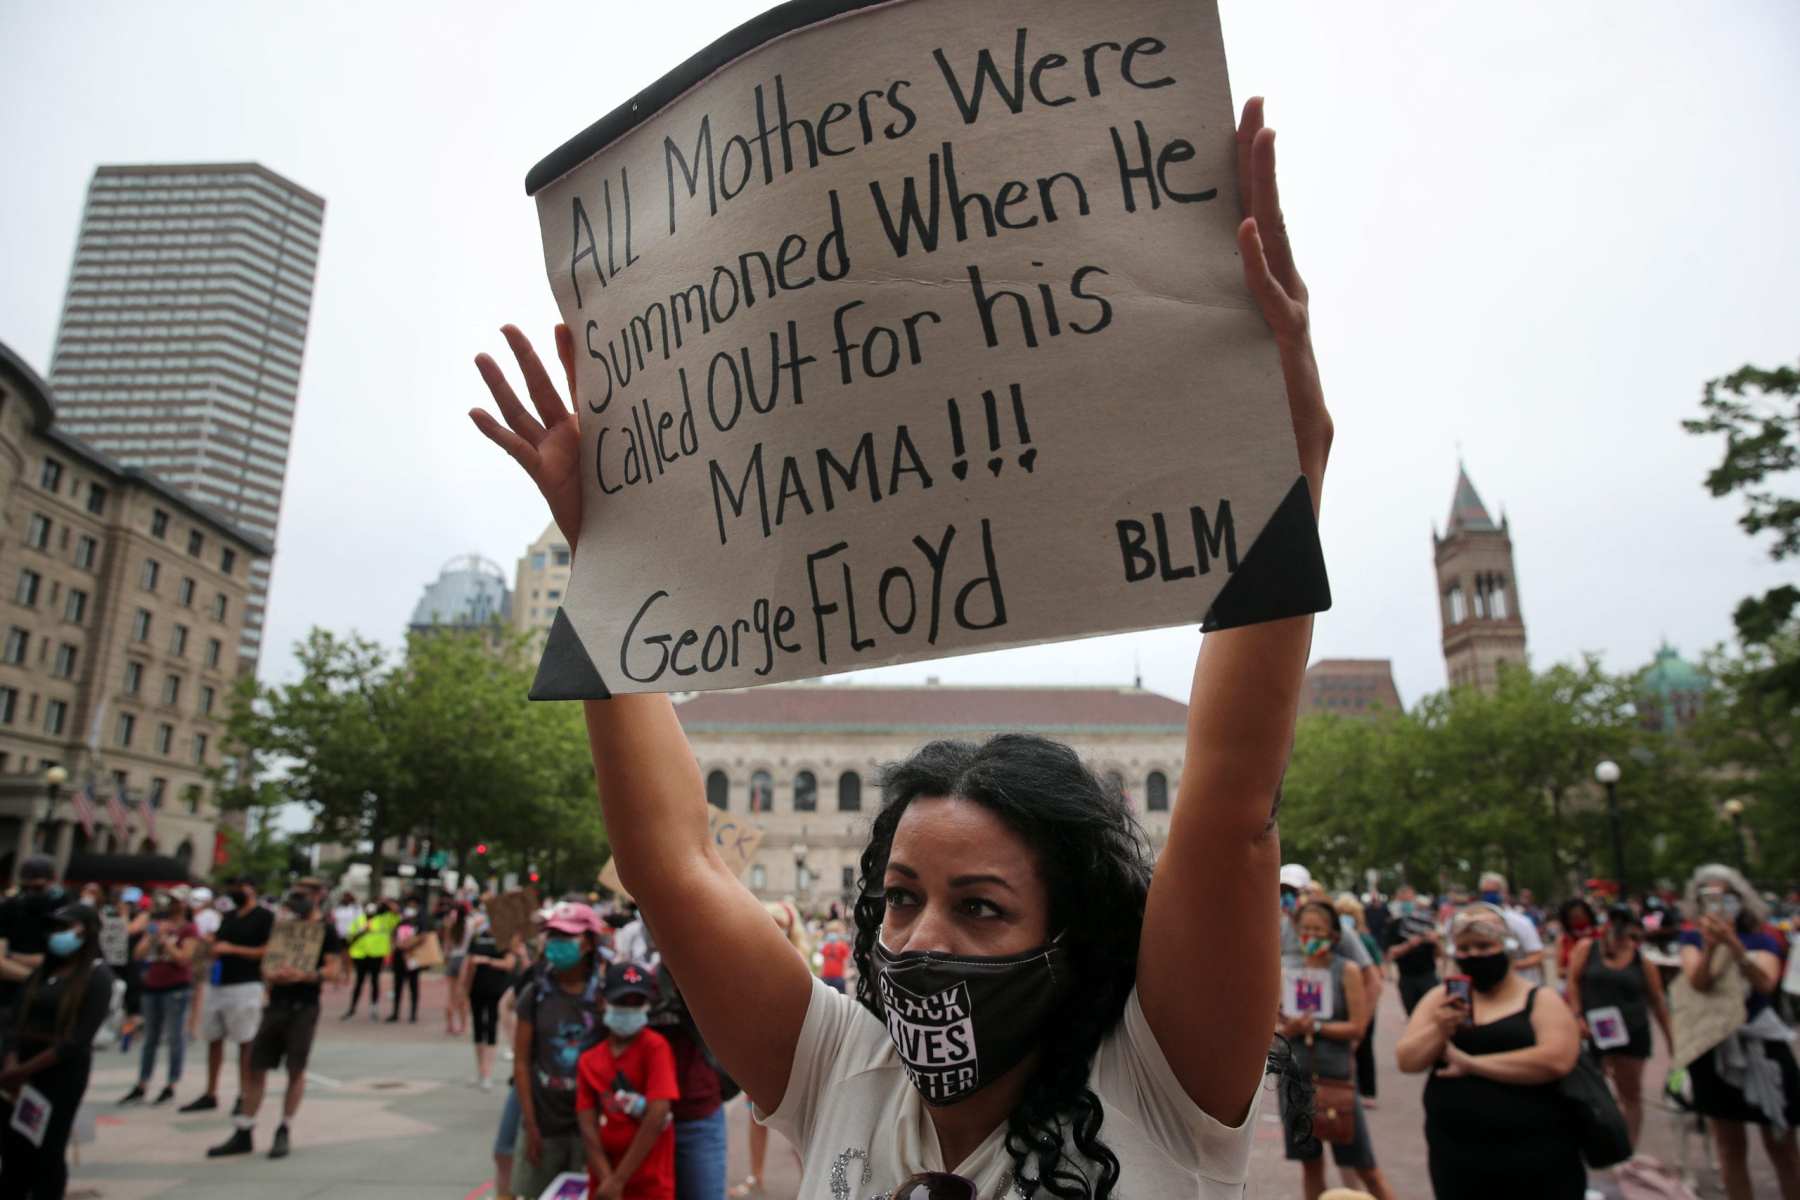 Shellee Mendes, a mother of three, raised her sign during the March Like A Mother for Black Lives rally at Copley Square in Boston, MA on June 27, 2020. Organizers say the peaceful, family-friendly event was created in response to the murders of George Floyd, Breonna Taylor, and Ahmaud Arbery to empower mothers to stand in solidarity against racism and anti-blackness while demanding radical systemic change.